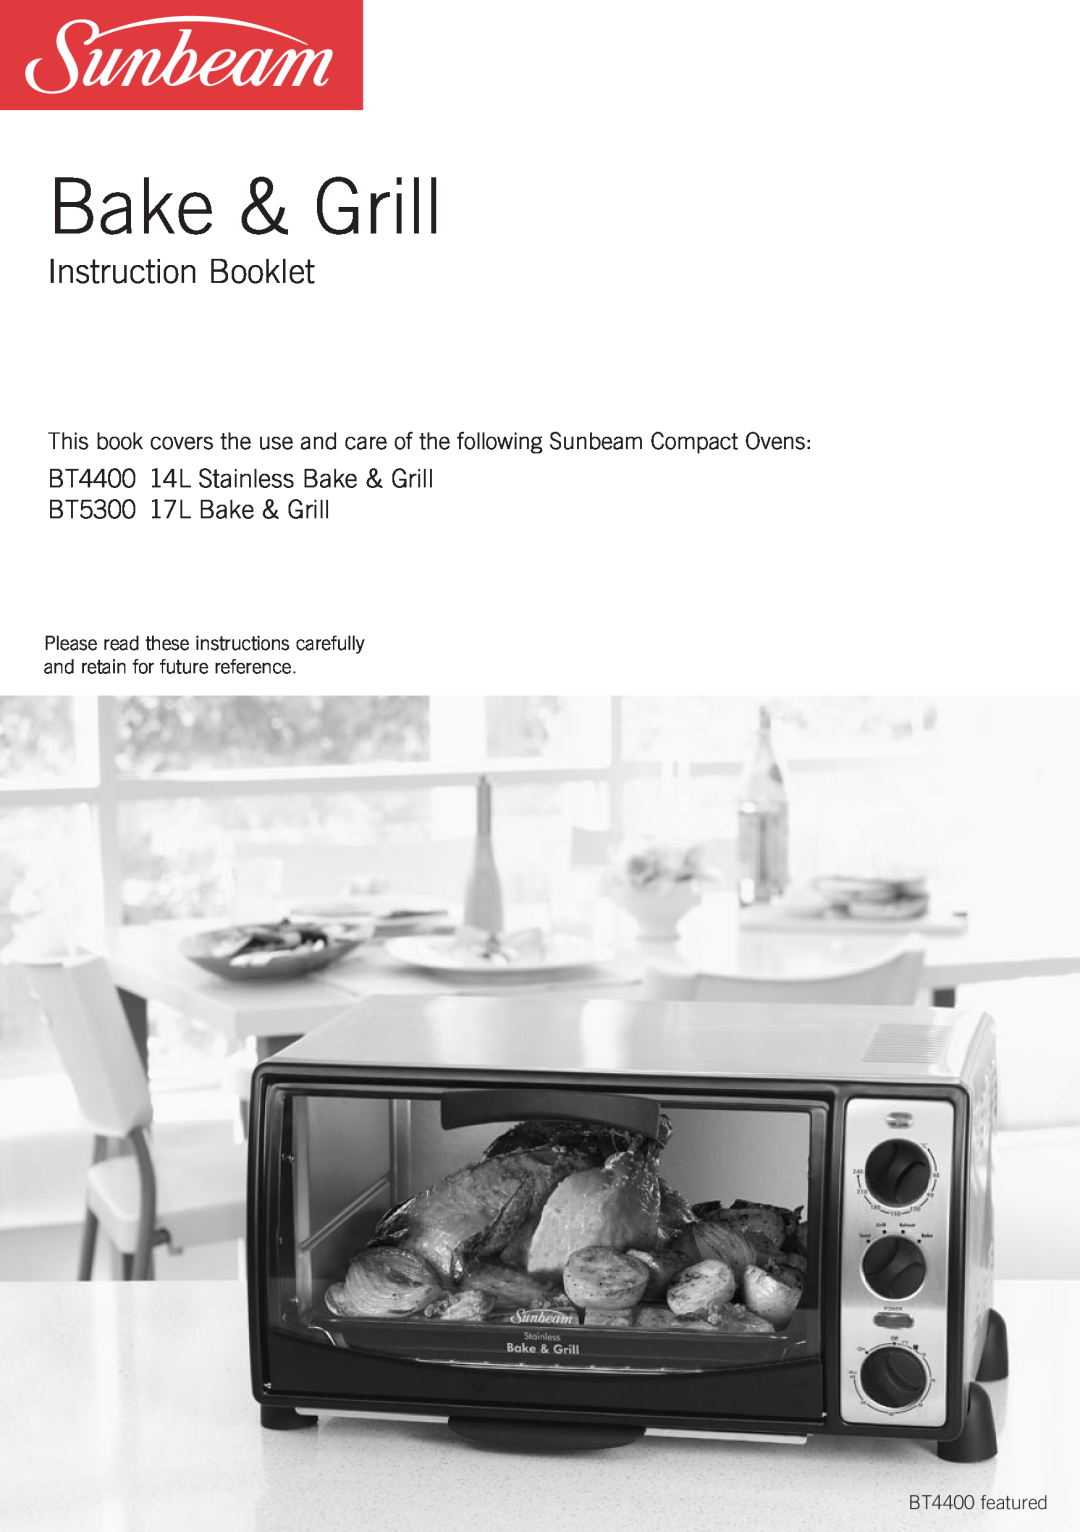 Sunbeam manual Instruction Booklet, BT4400 14L Stainless Bake & Grill, BT5300 17L Bake & Grill 